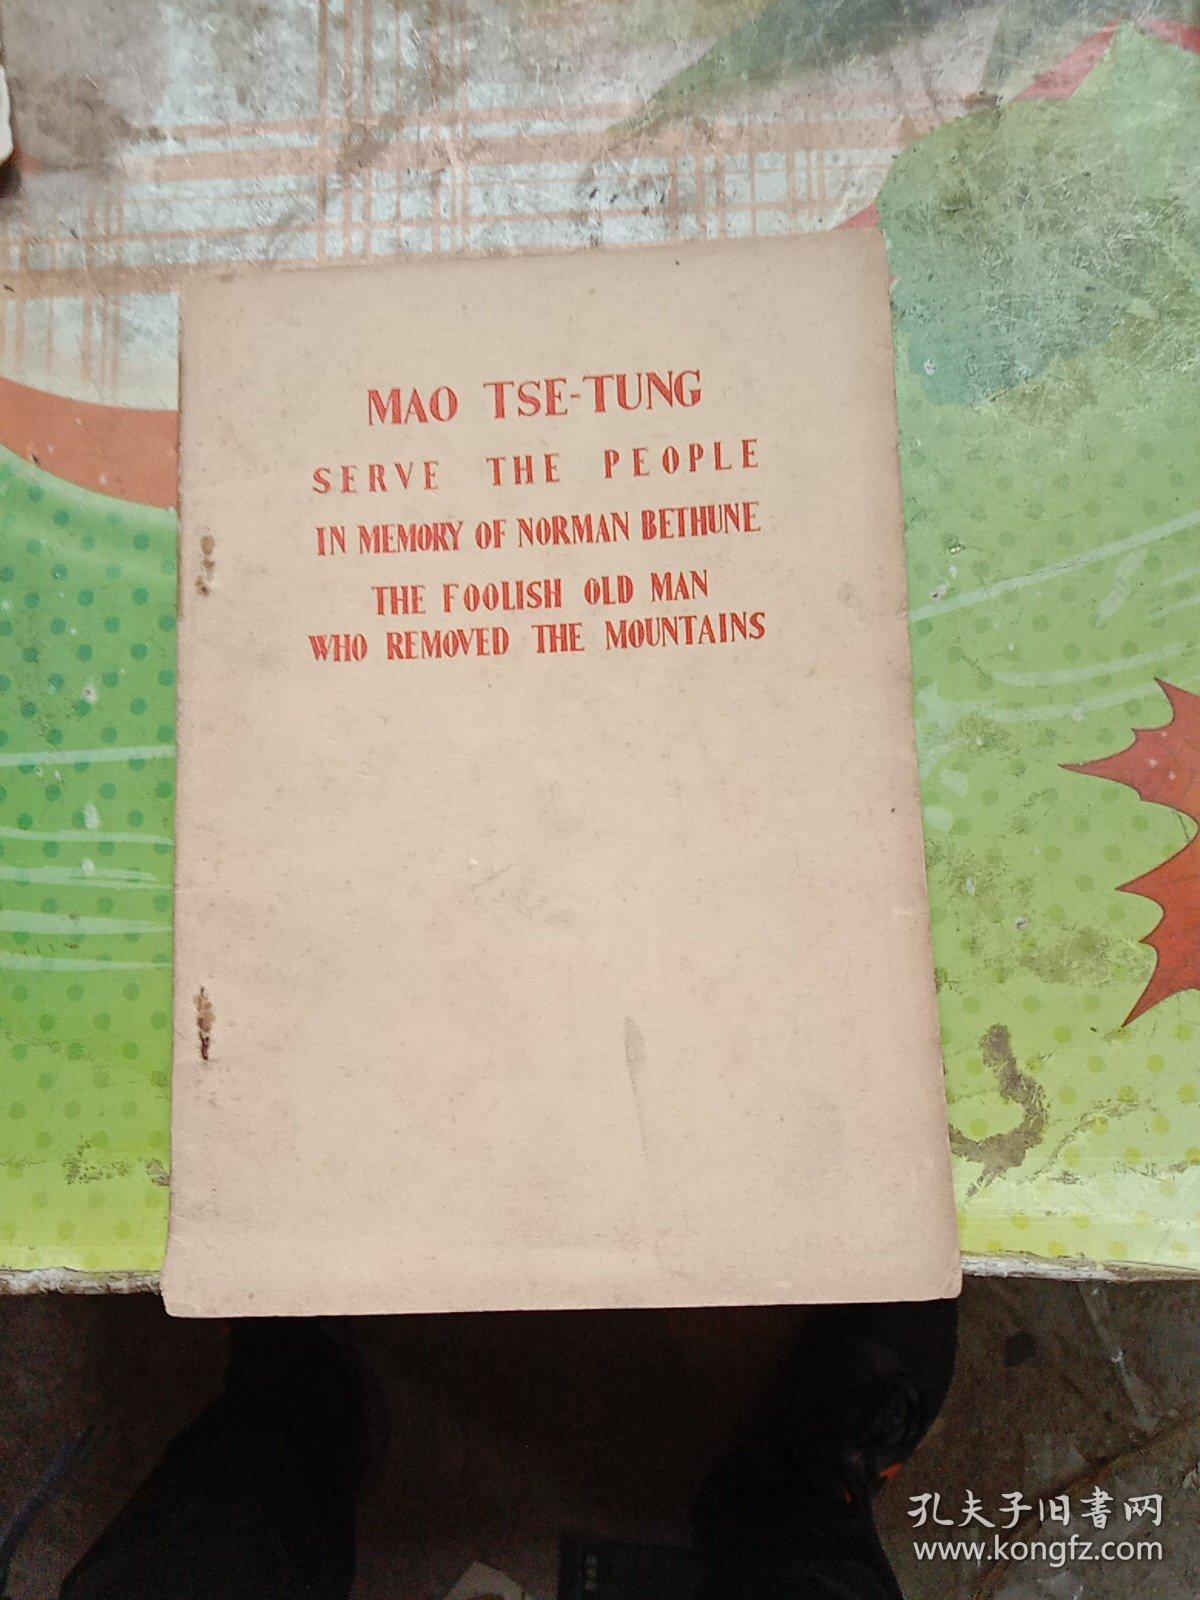 MAO TSE-TUNG SERVE THE PEOPLE IN MEMORY OF NORMAN BETHUNE